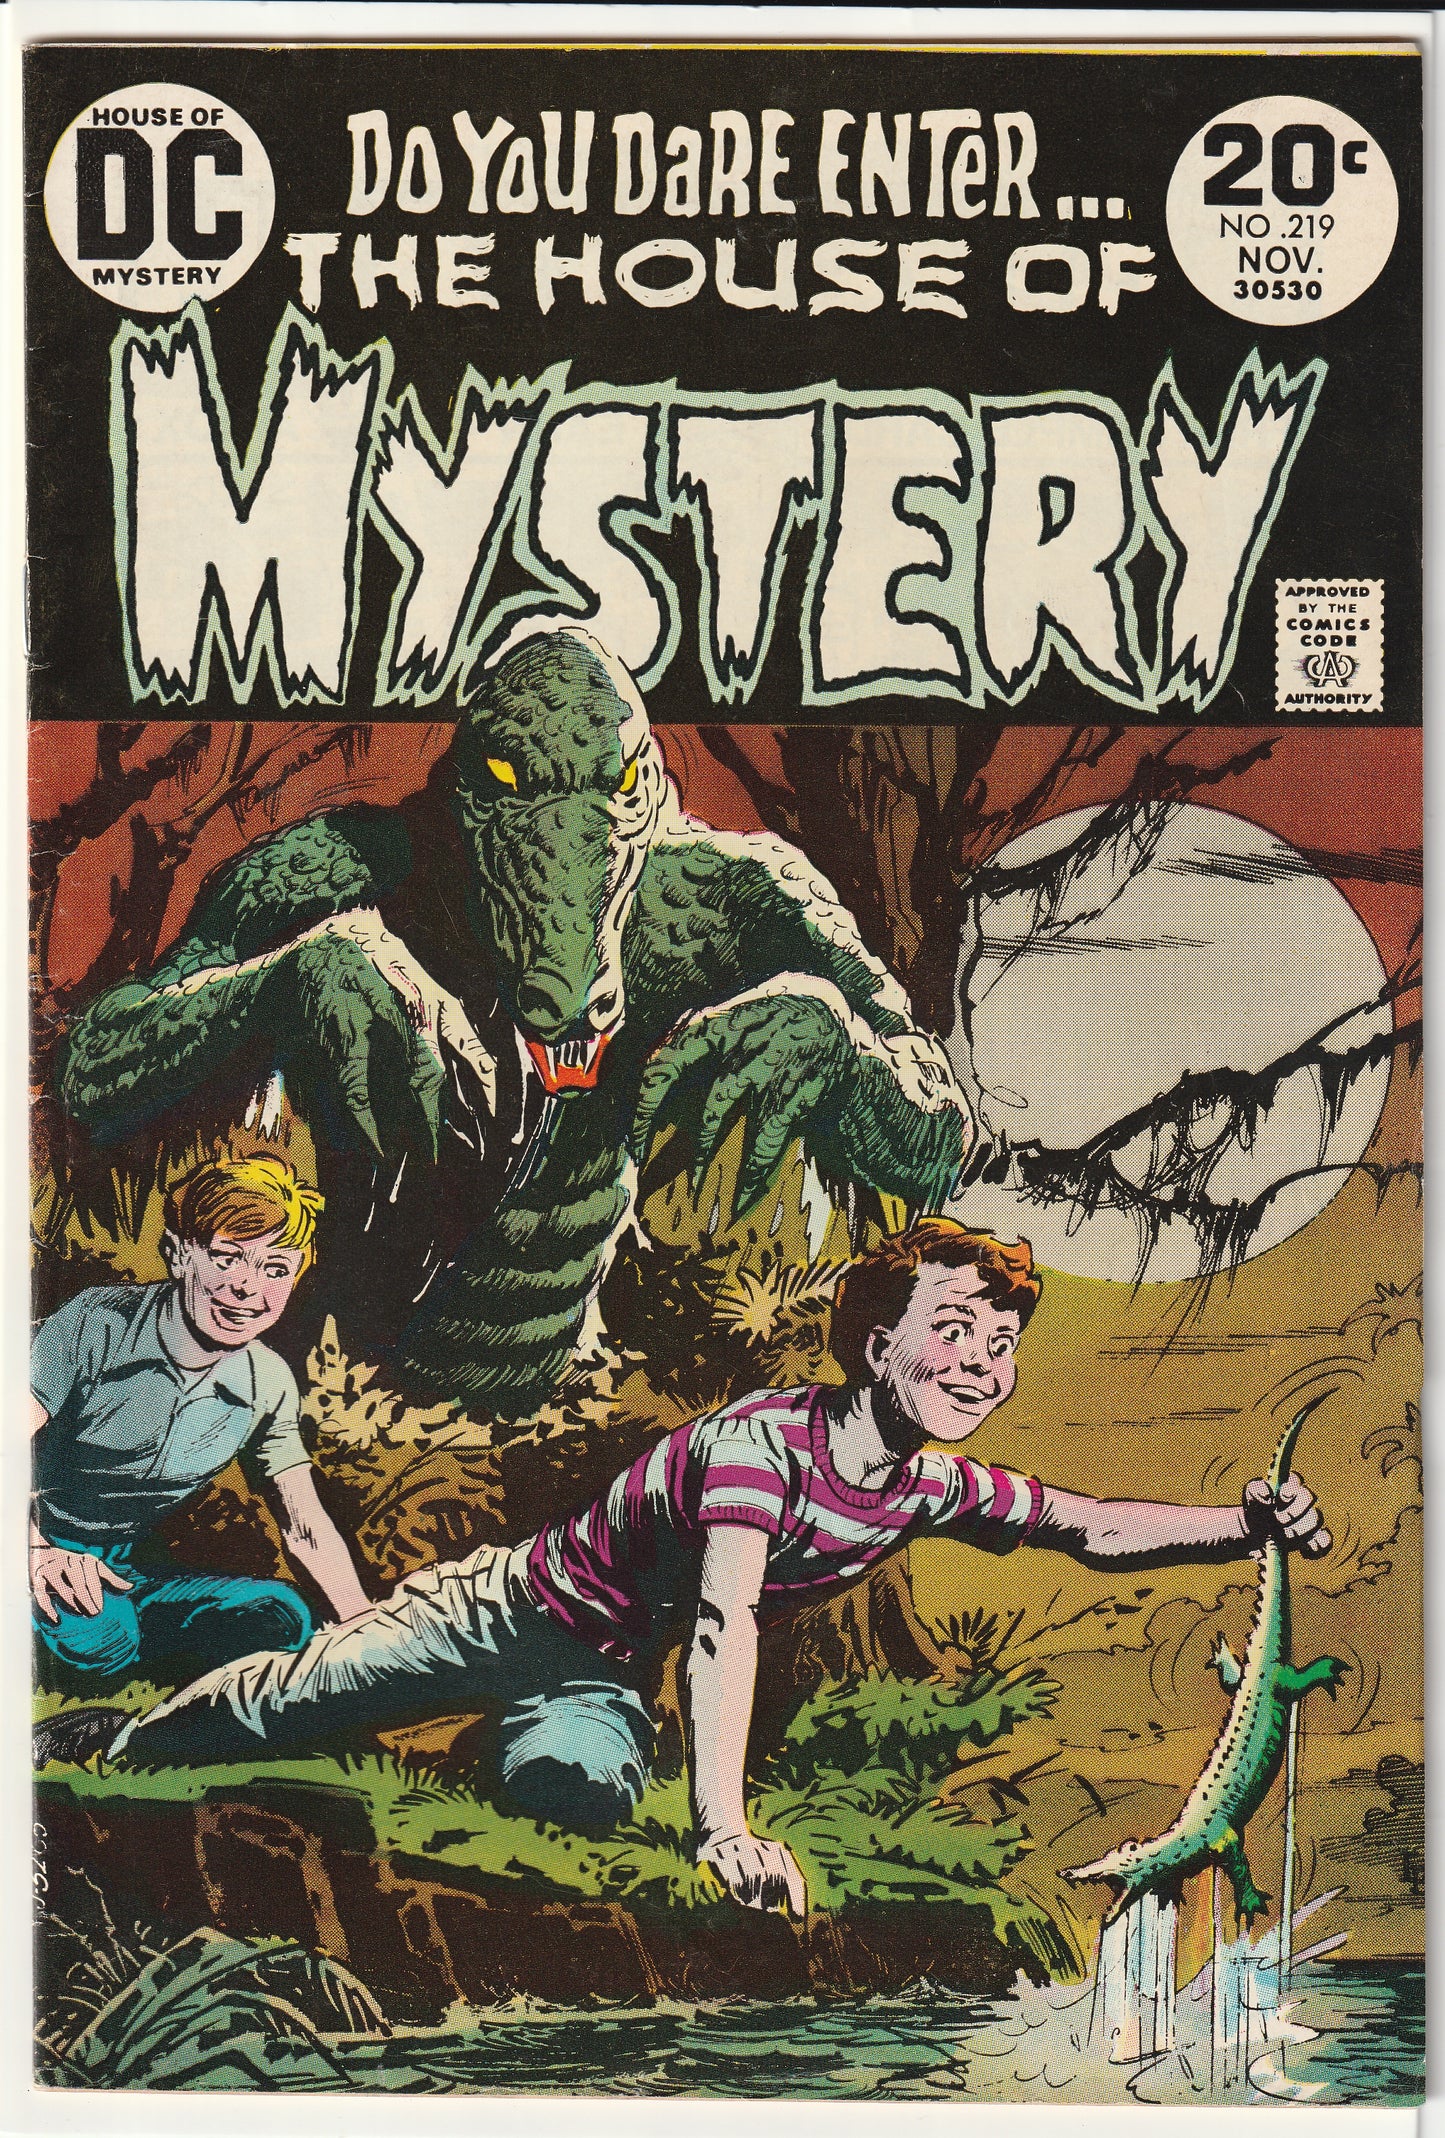 House of Mystery #219 (1973)